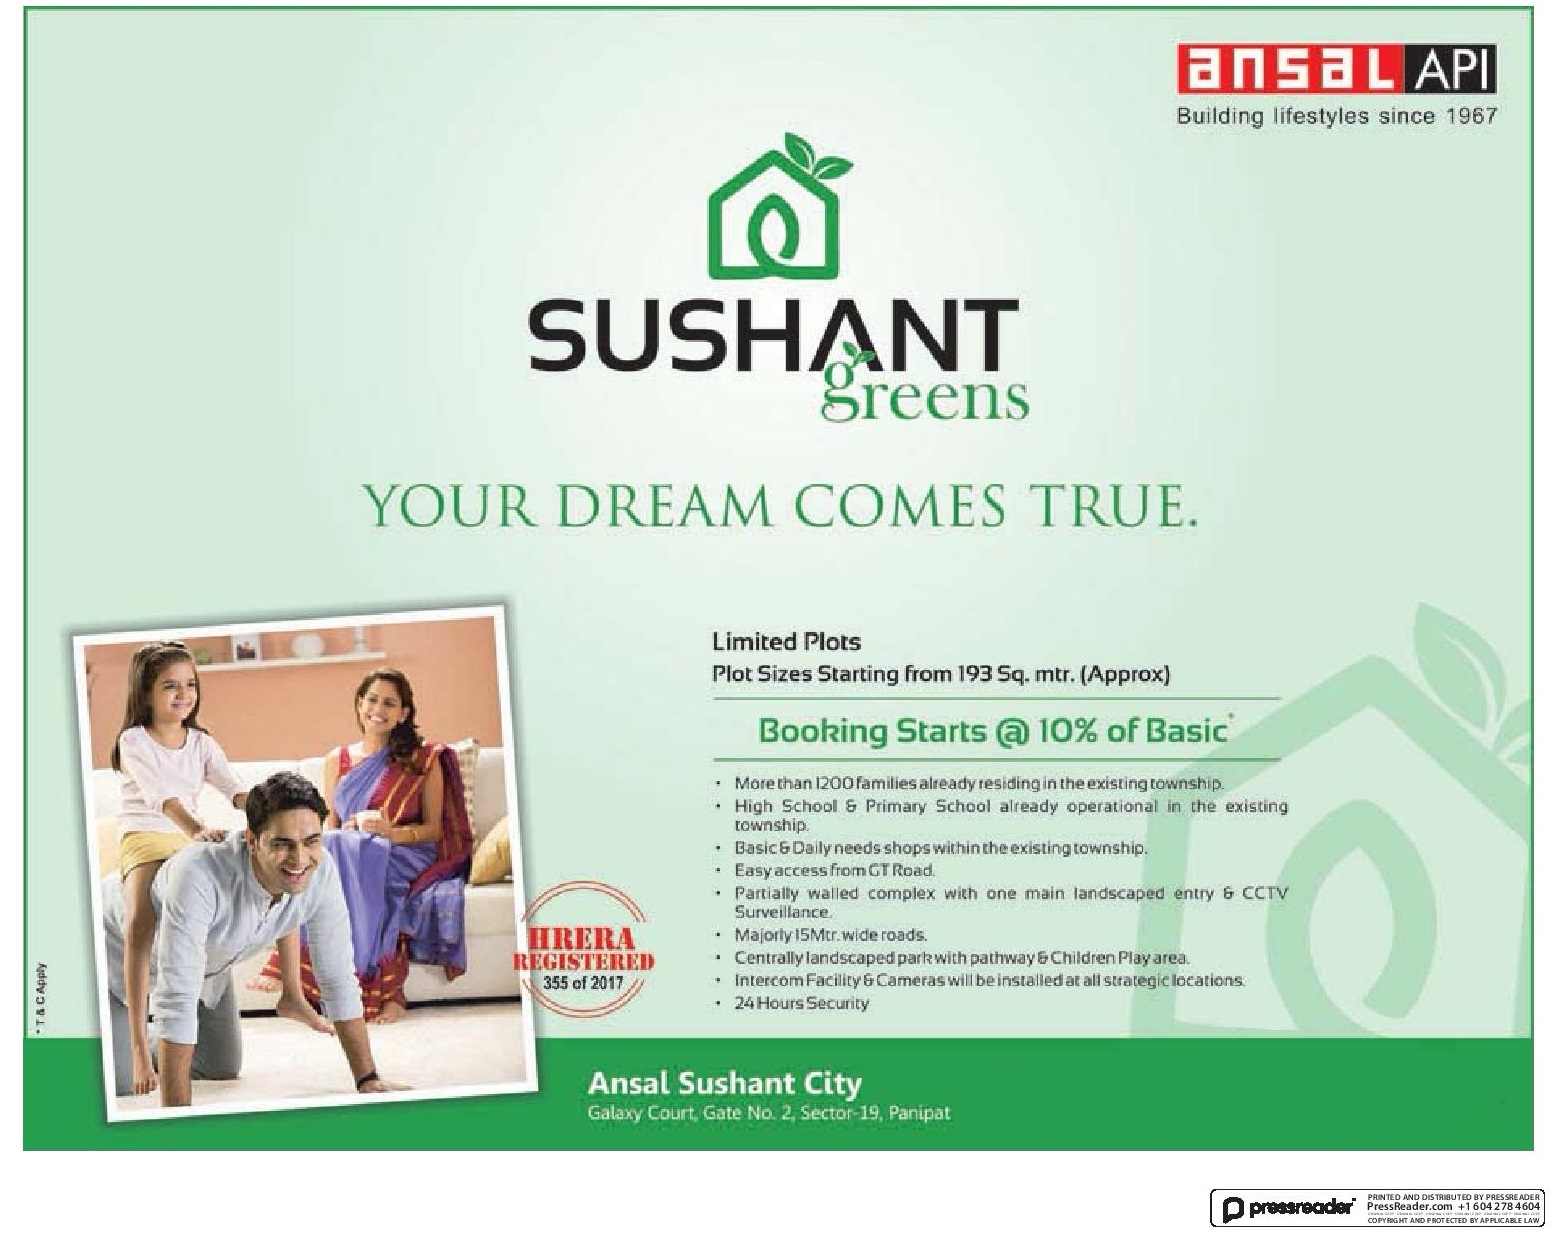 Make your dream come true by residing at Ansal Sushant City in Panipat